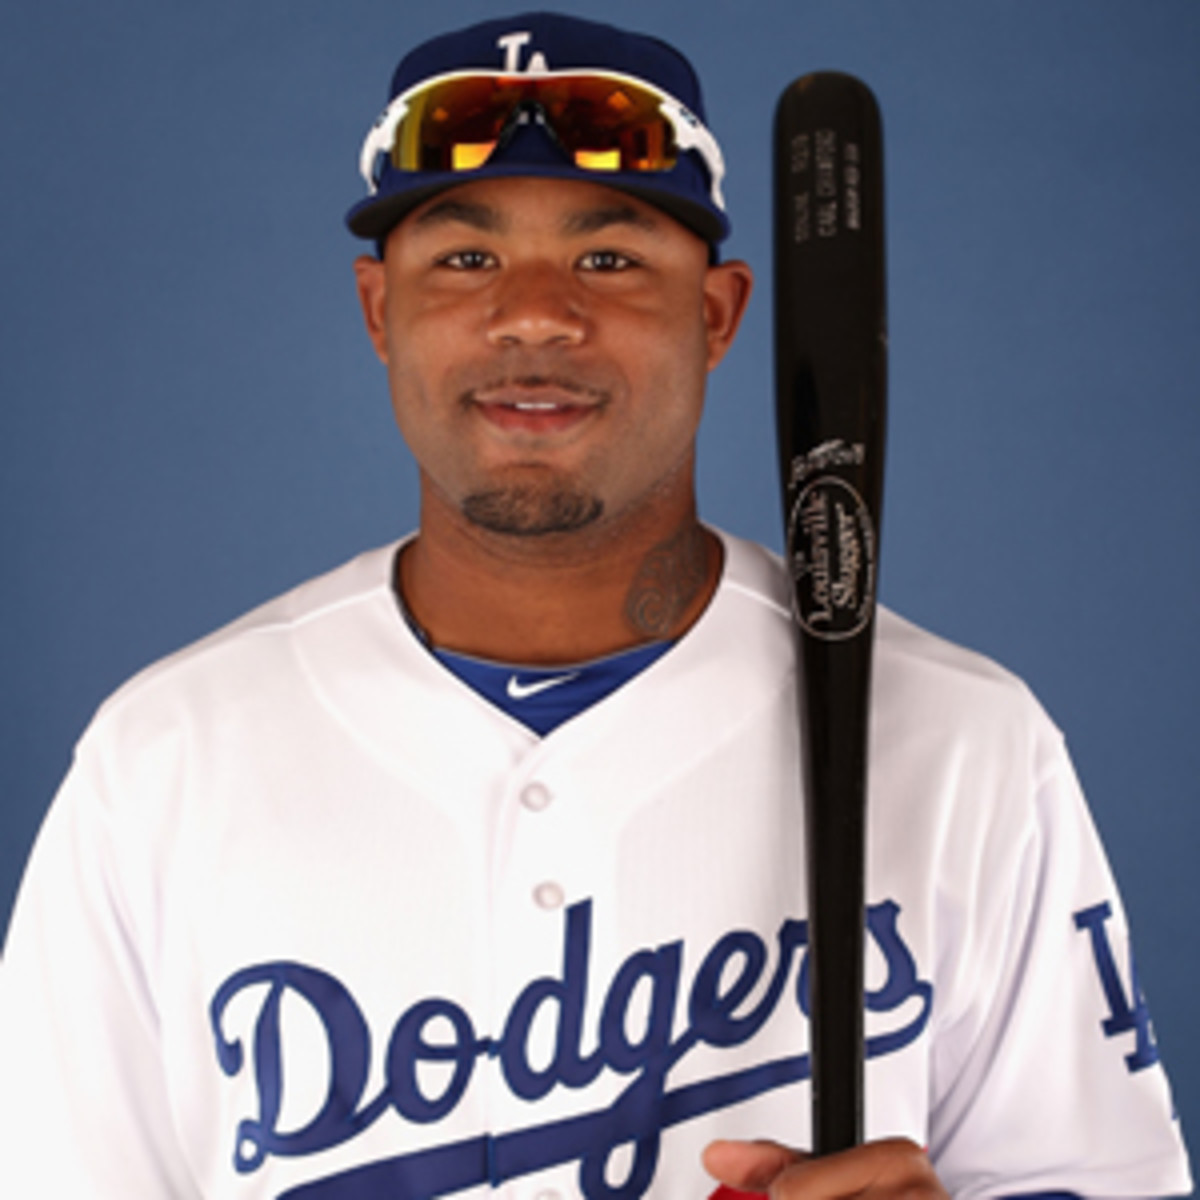 Carl Crawford says he was miserable during his two seasons in Boston. (Christian Petersen/Getty Images)